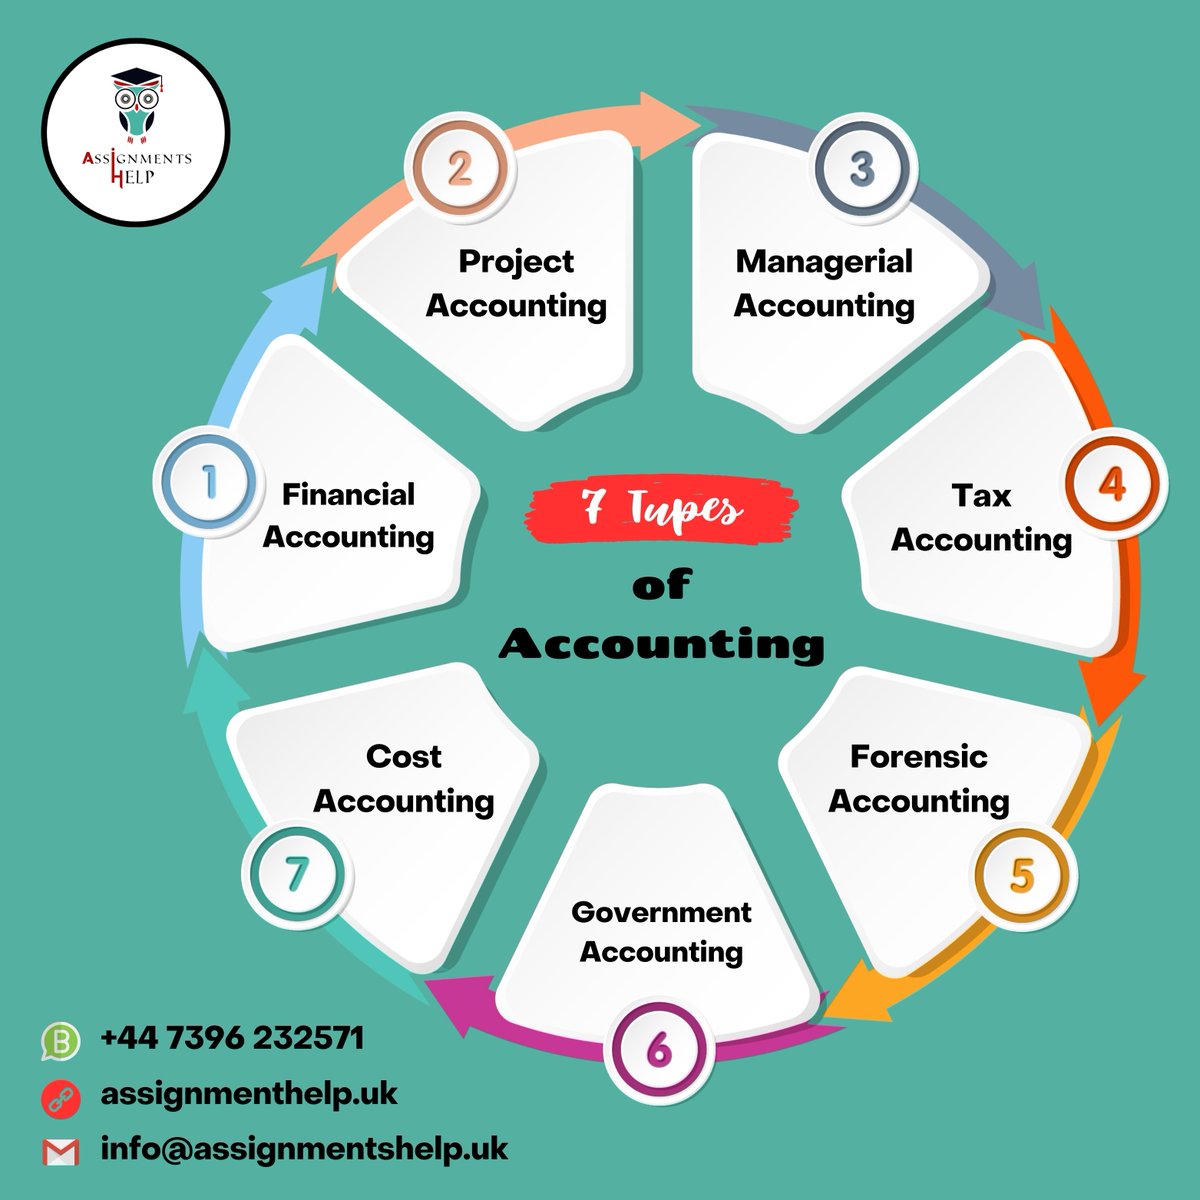 Learn to Master the Different Types of Accounting Assignments!
Our Professional Service Can Handle Them All!
.
.
#accountingassignment #Accounting #AccountingHelp   #accountingservices #accountingstudents #accountingexpert #accountingproblems #Students #universities #student